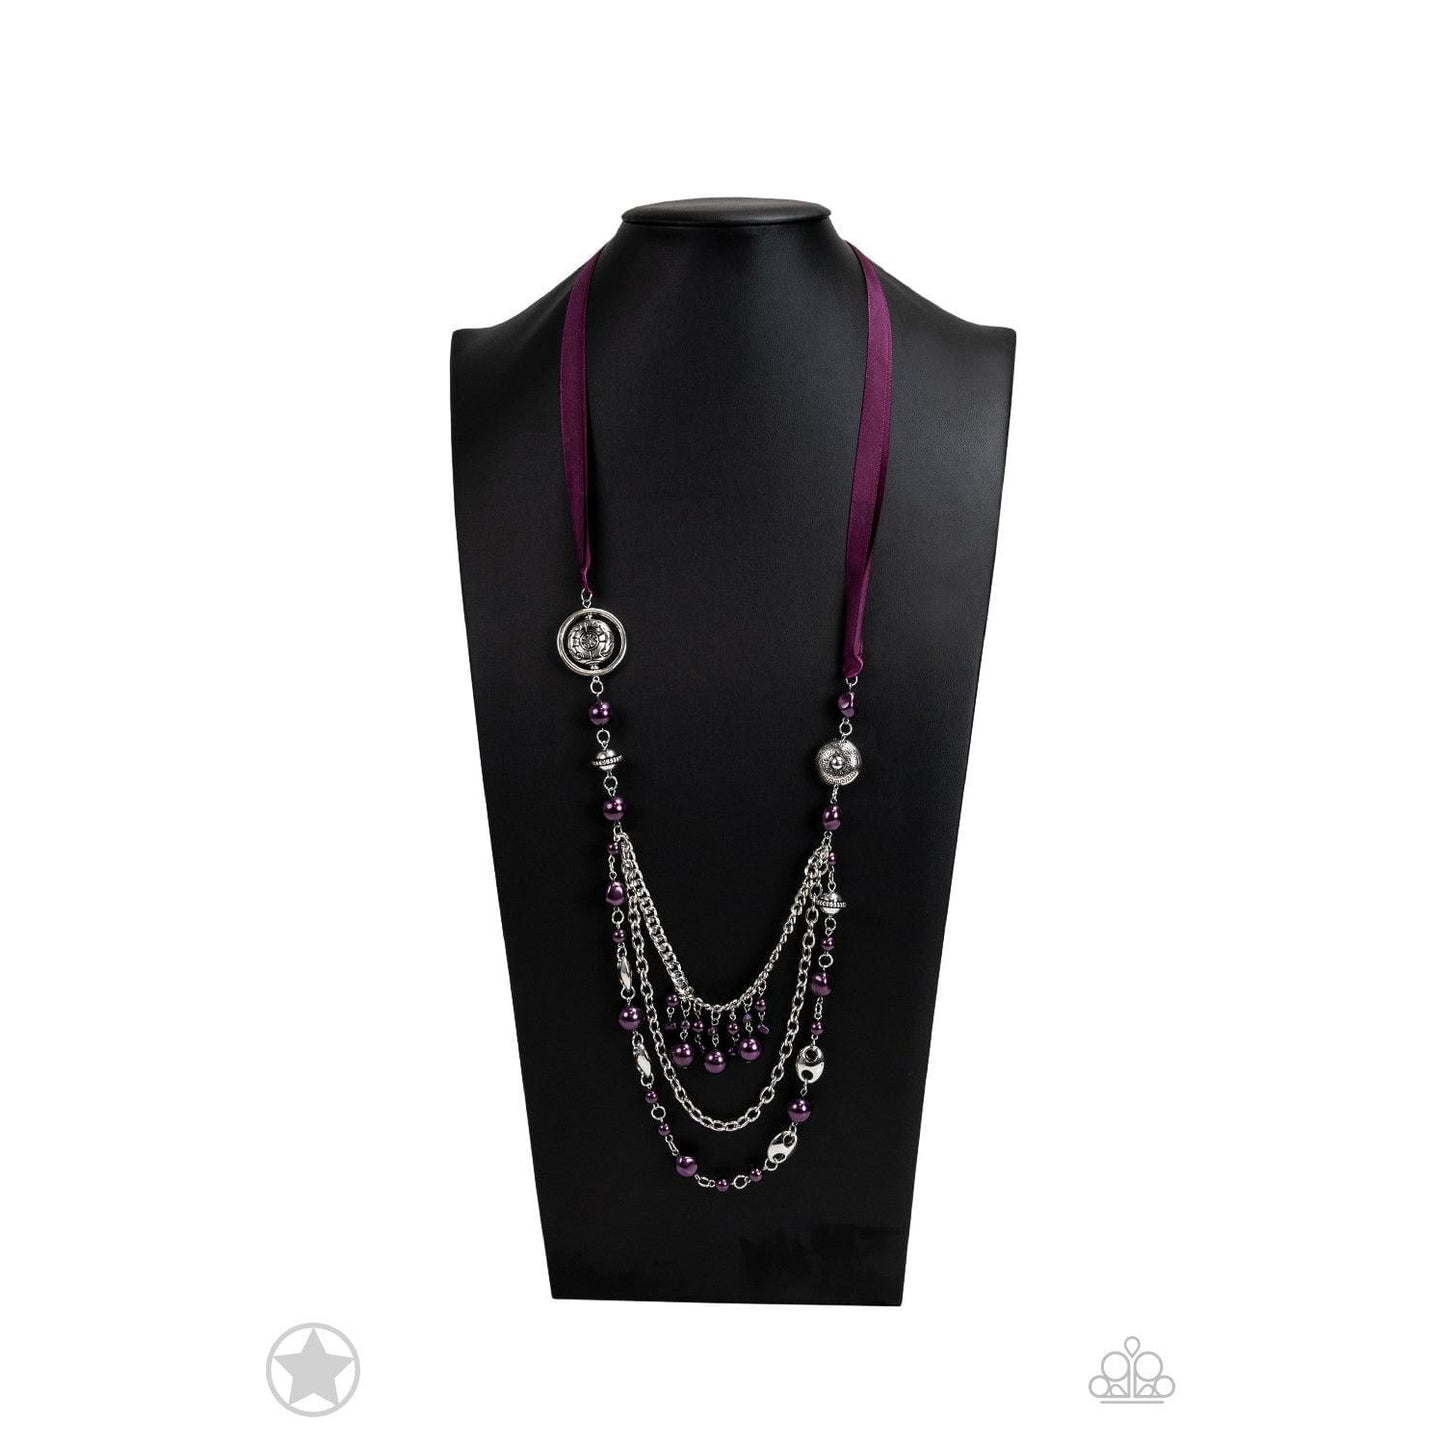 All The Trimmings - Purple Ribbon Blockbuster Necklace - A Large Selection Hand-Chains And Jewelry On rainbowartsreview,Women's Jewelry | Necklaces, Earrings, Bracelets